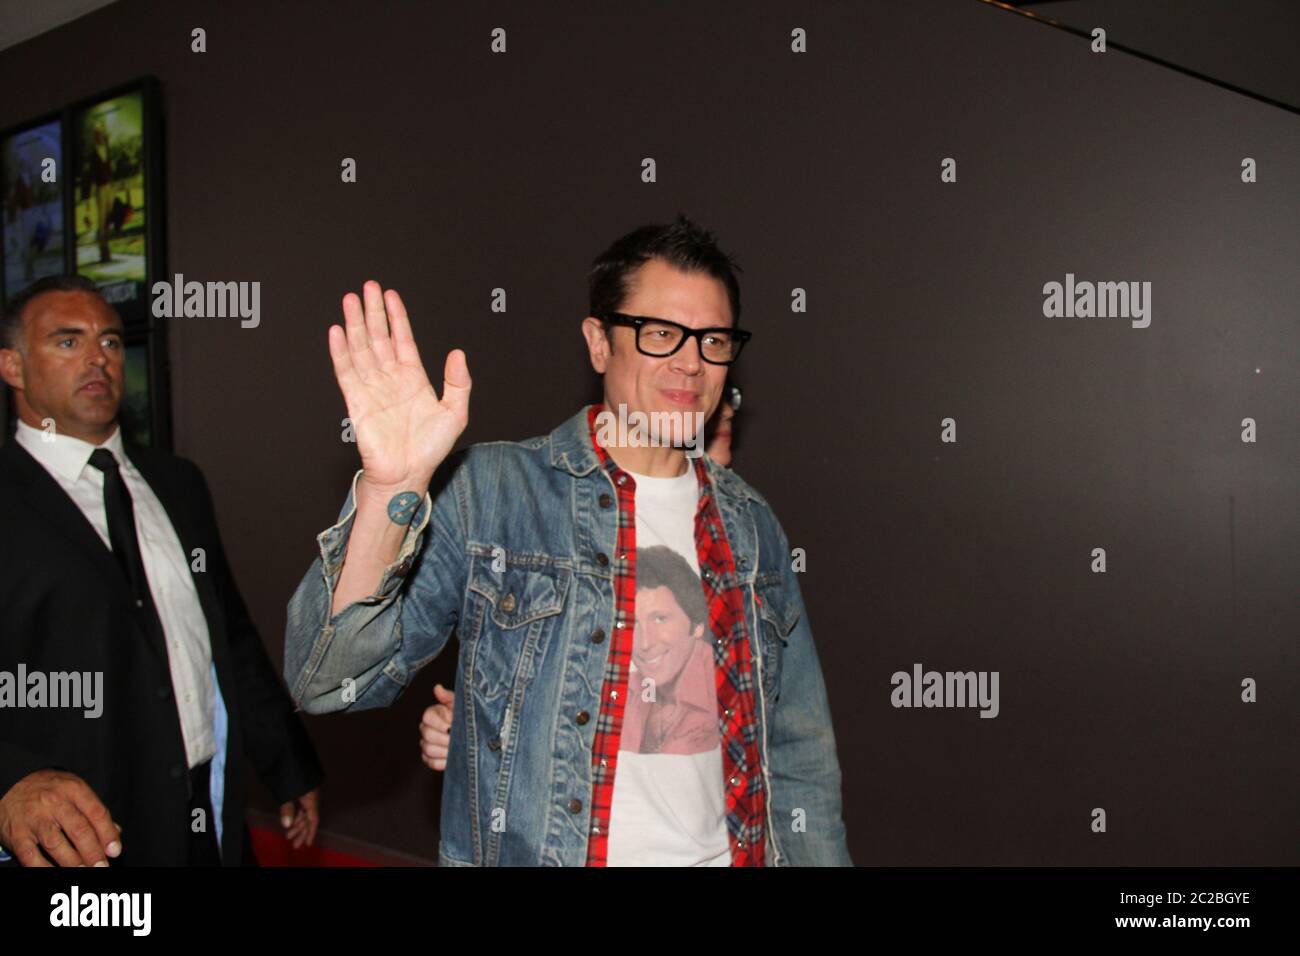 Johnny Knoxville ‘Irving Zisman’ waves to fans as he arrives at the Australian Special Event Screening of Jackass Presents: Bad Grandpa at Event Cinem Stock Photo